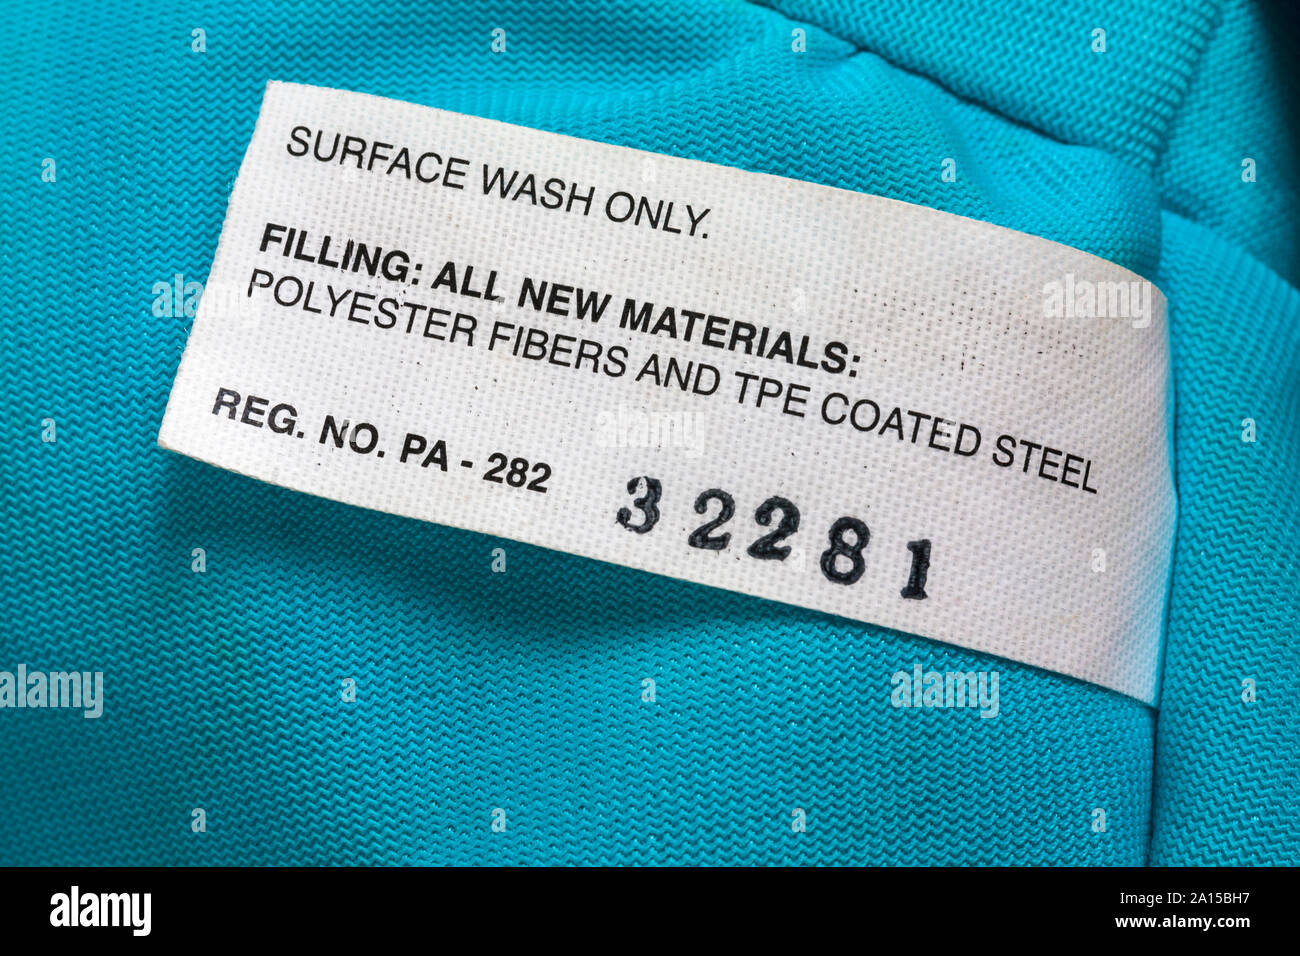 Surface wash only filling all new materials polyester fibers and tpe coated steel - label on soft toy Stock Photo